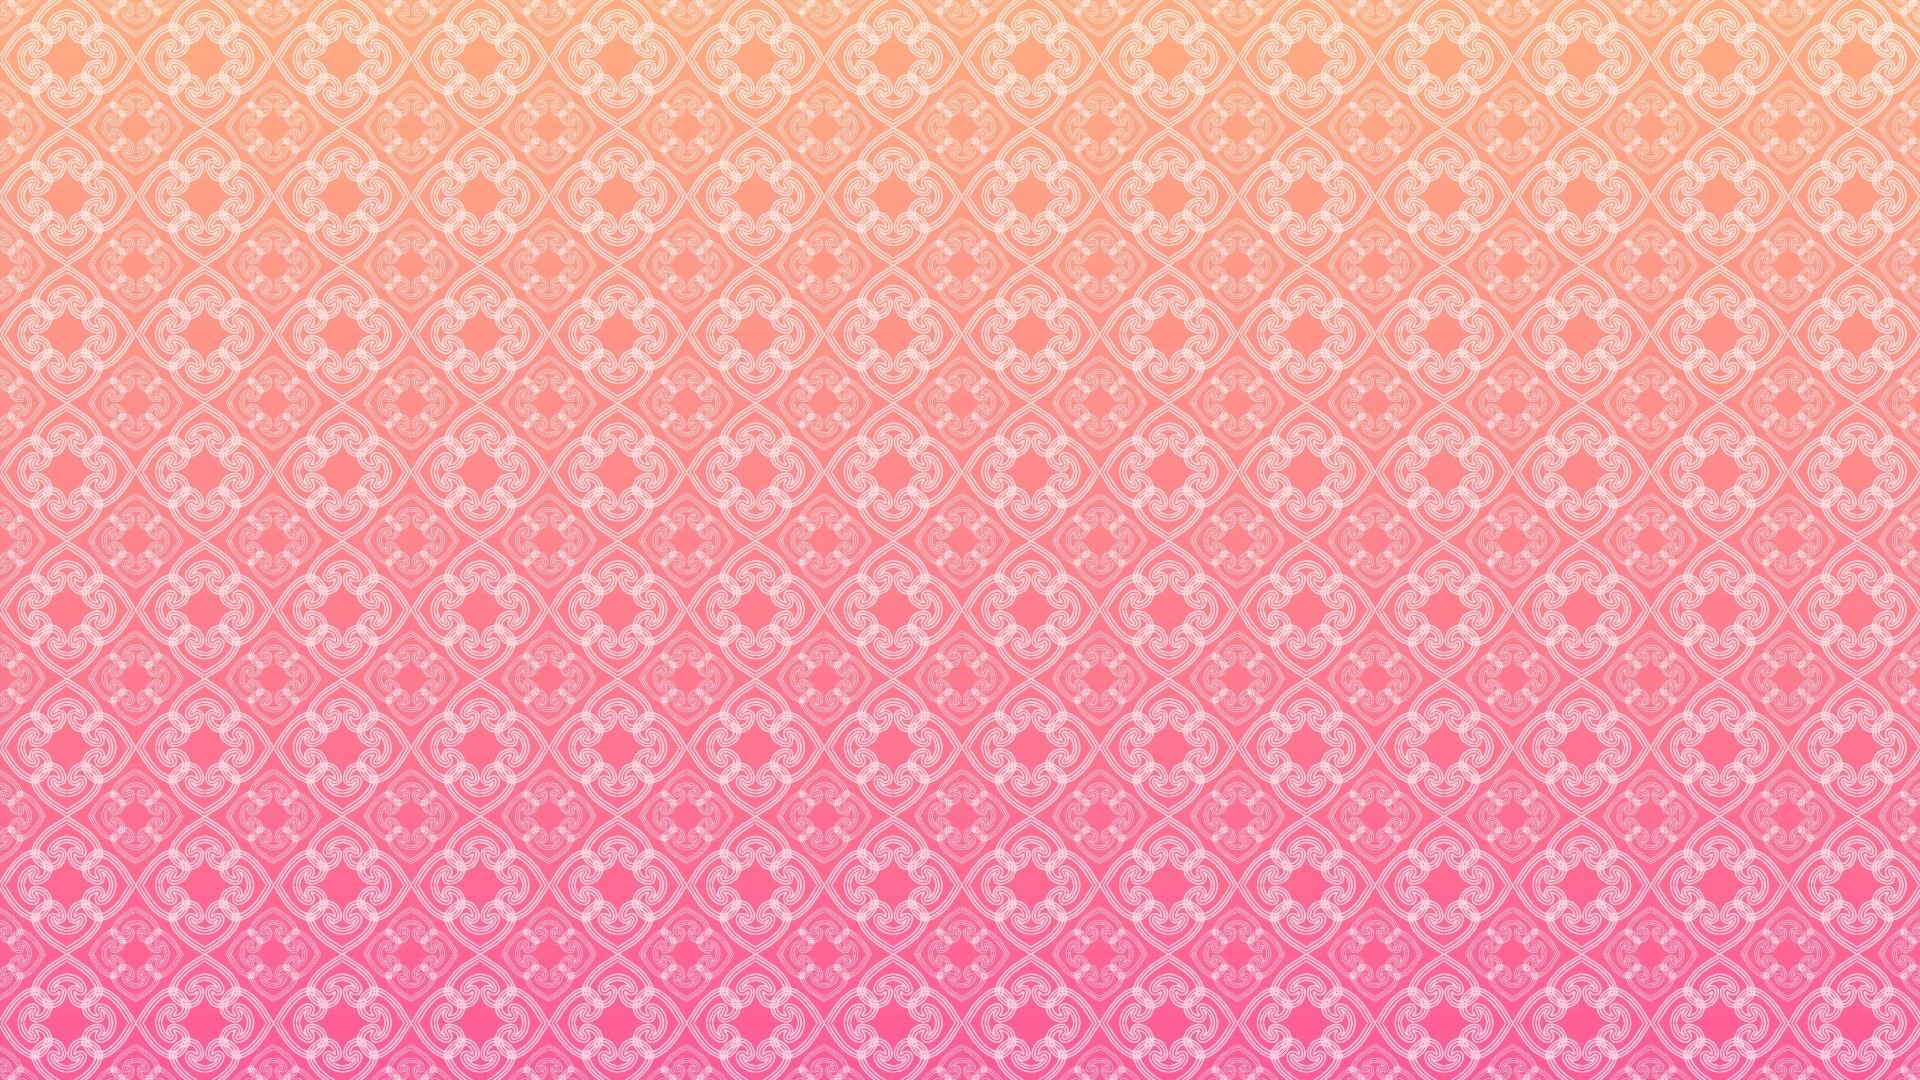 wallpapers tumblr,pink,pattern,wrapping paper,design,textile